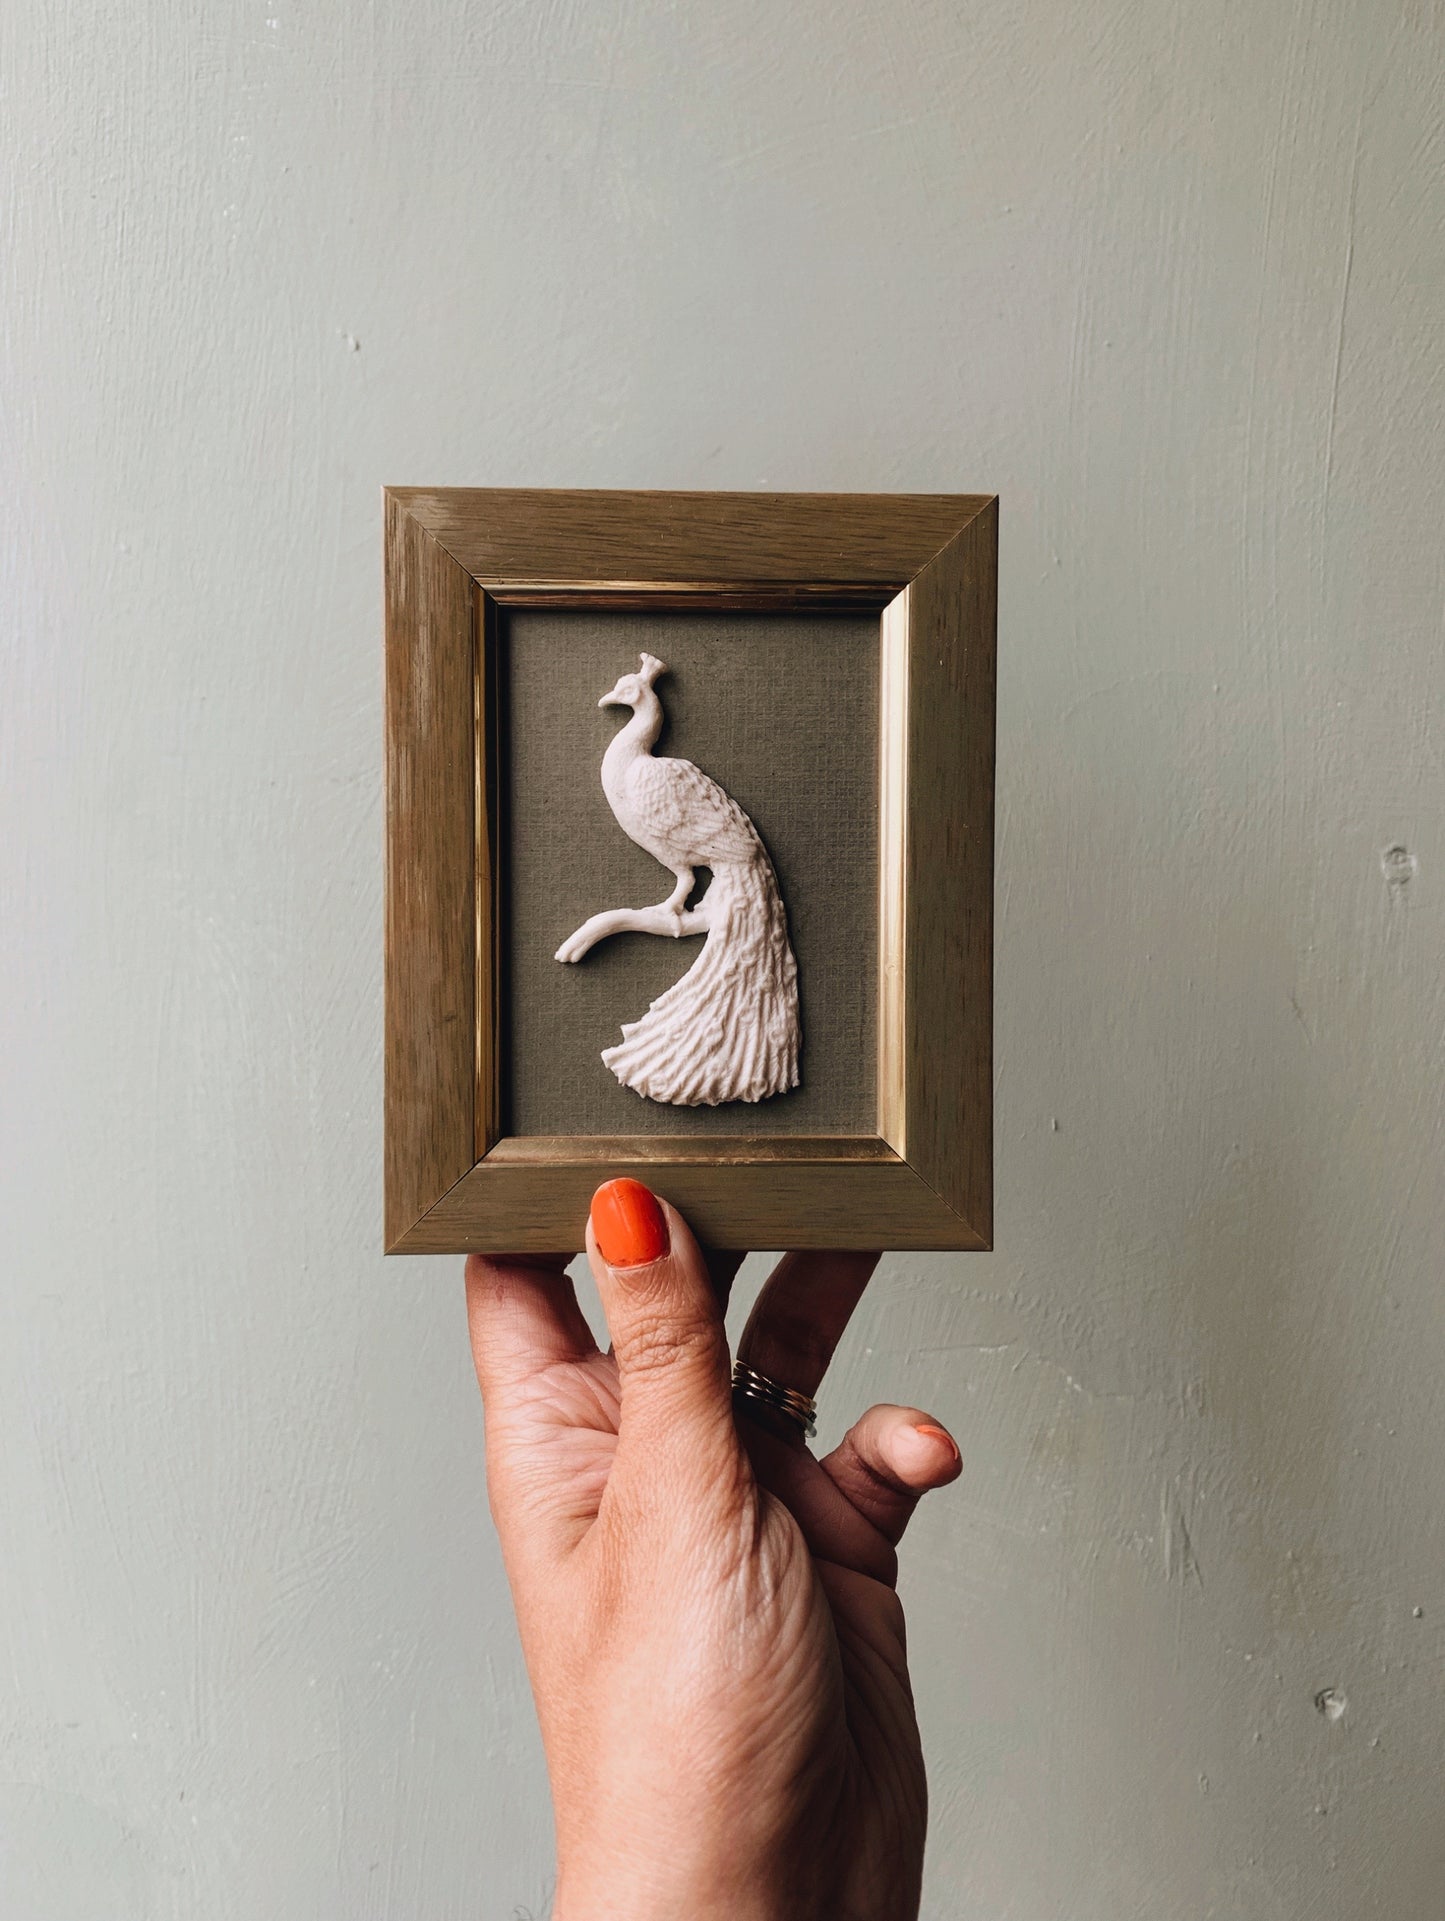 Antique Porcelain Peacock Relief in Frame